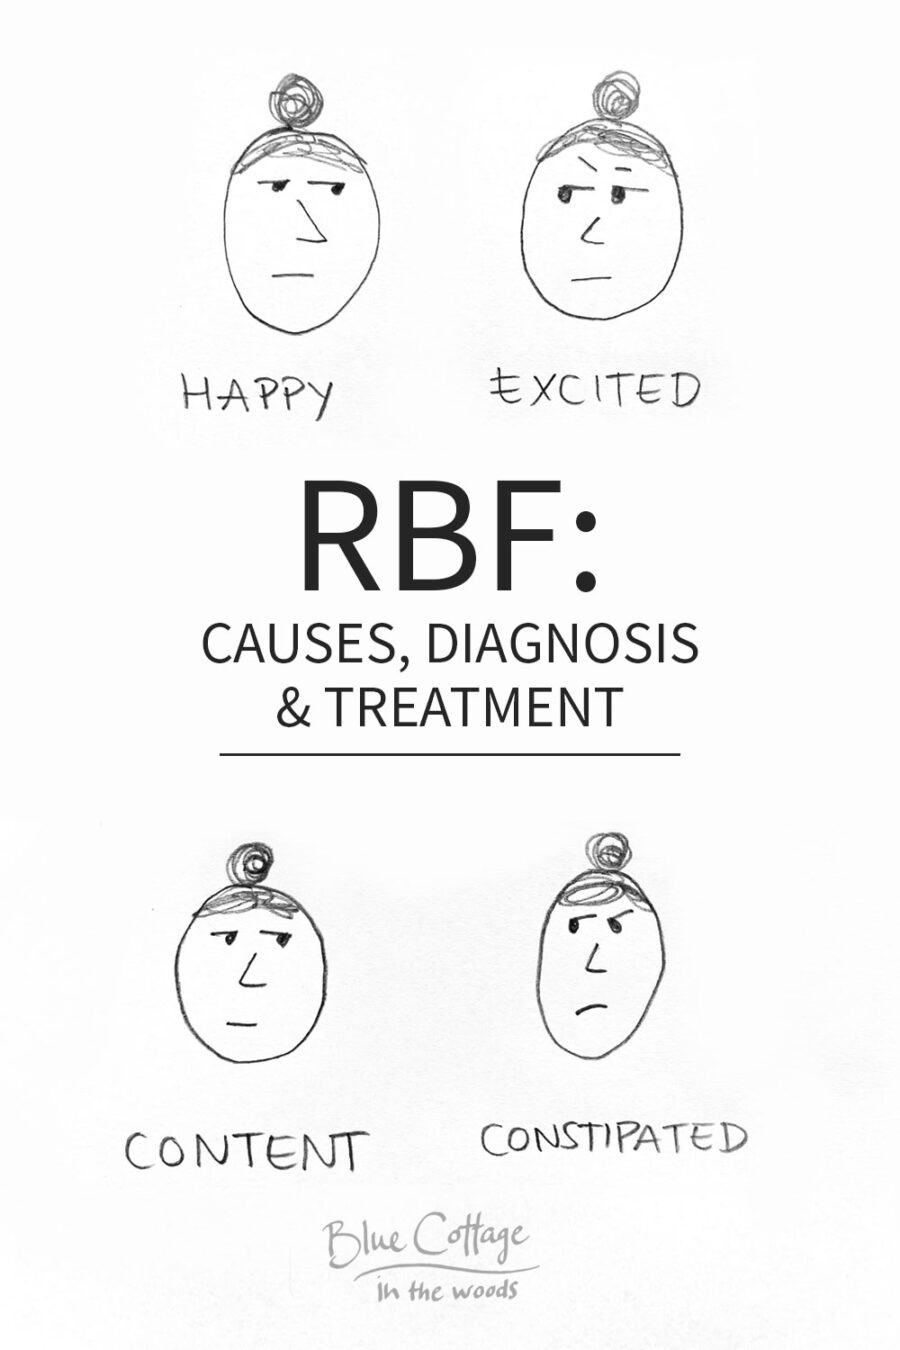 RBF-Causes-Diagnosis-and-Treatment